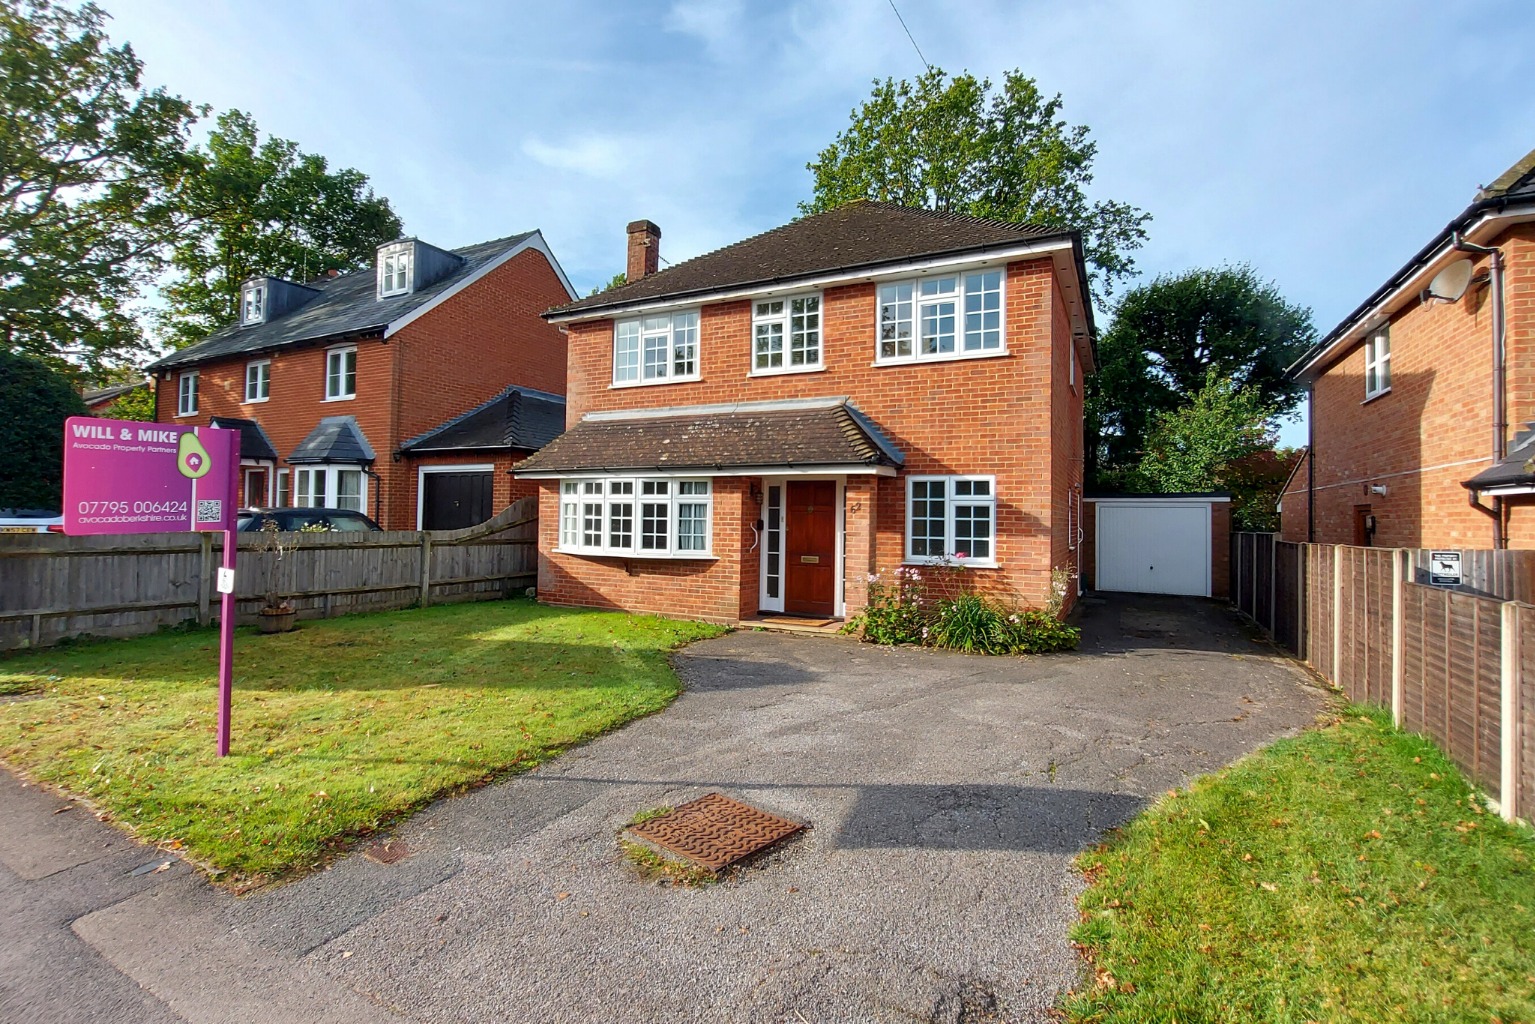 *Check out our property video - Marketed by Will and Mike* This impressive, rarely available four bedroom detached house would make an excellent family home. The property is situated in one of Crowthorne's most sought after roads and is only a few minutes walk from the High Street.